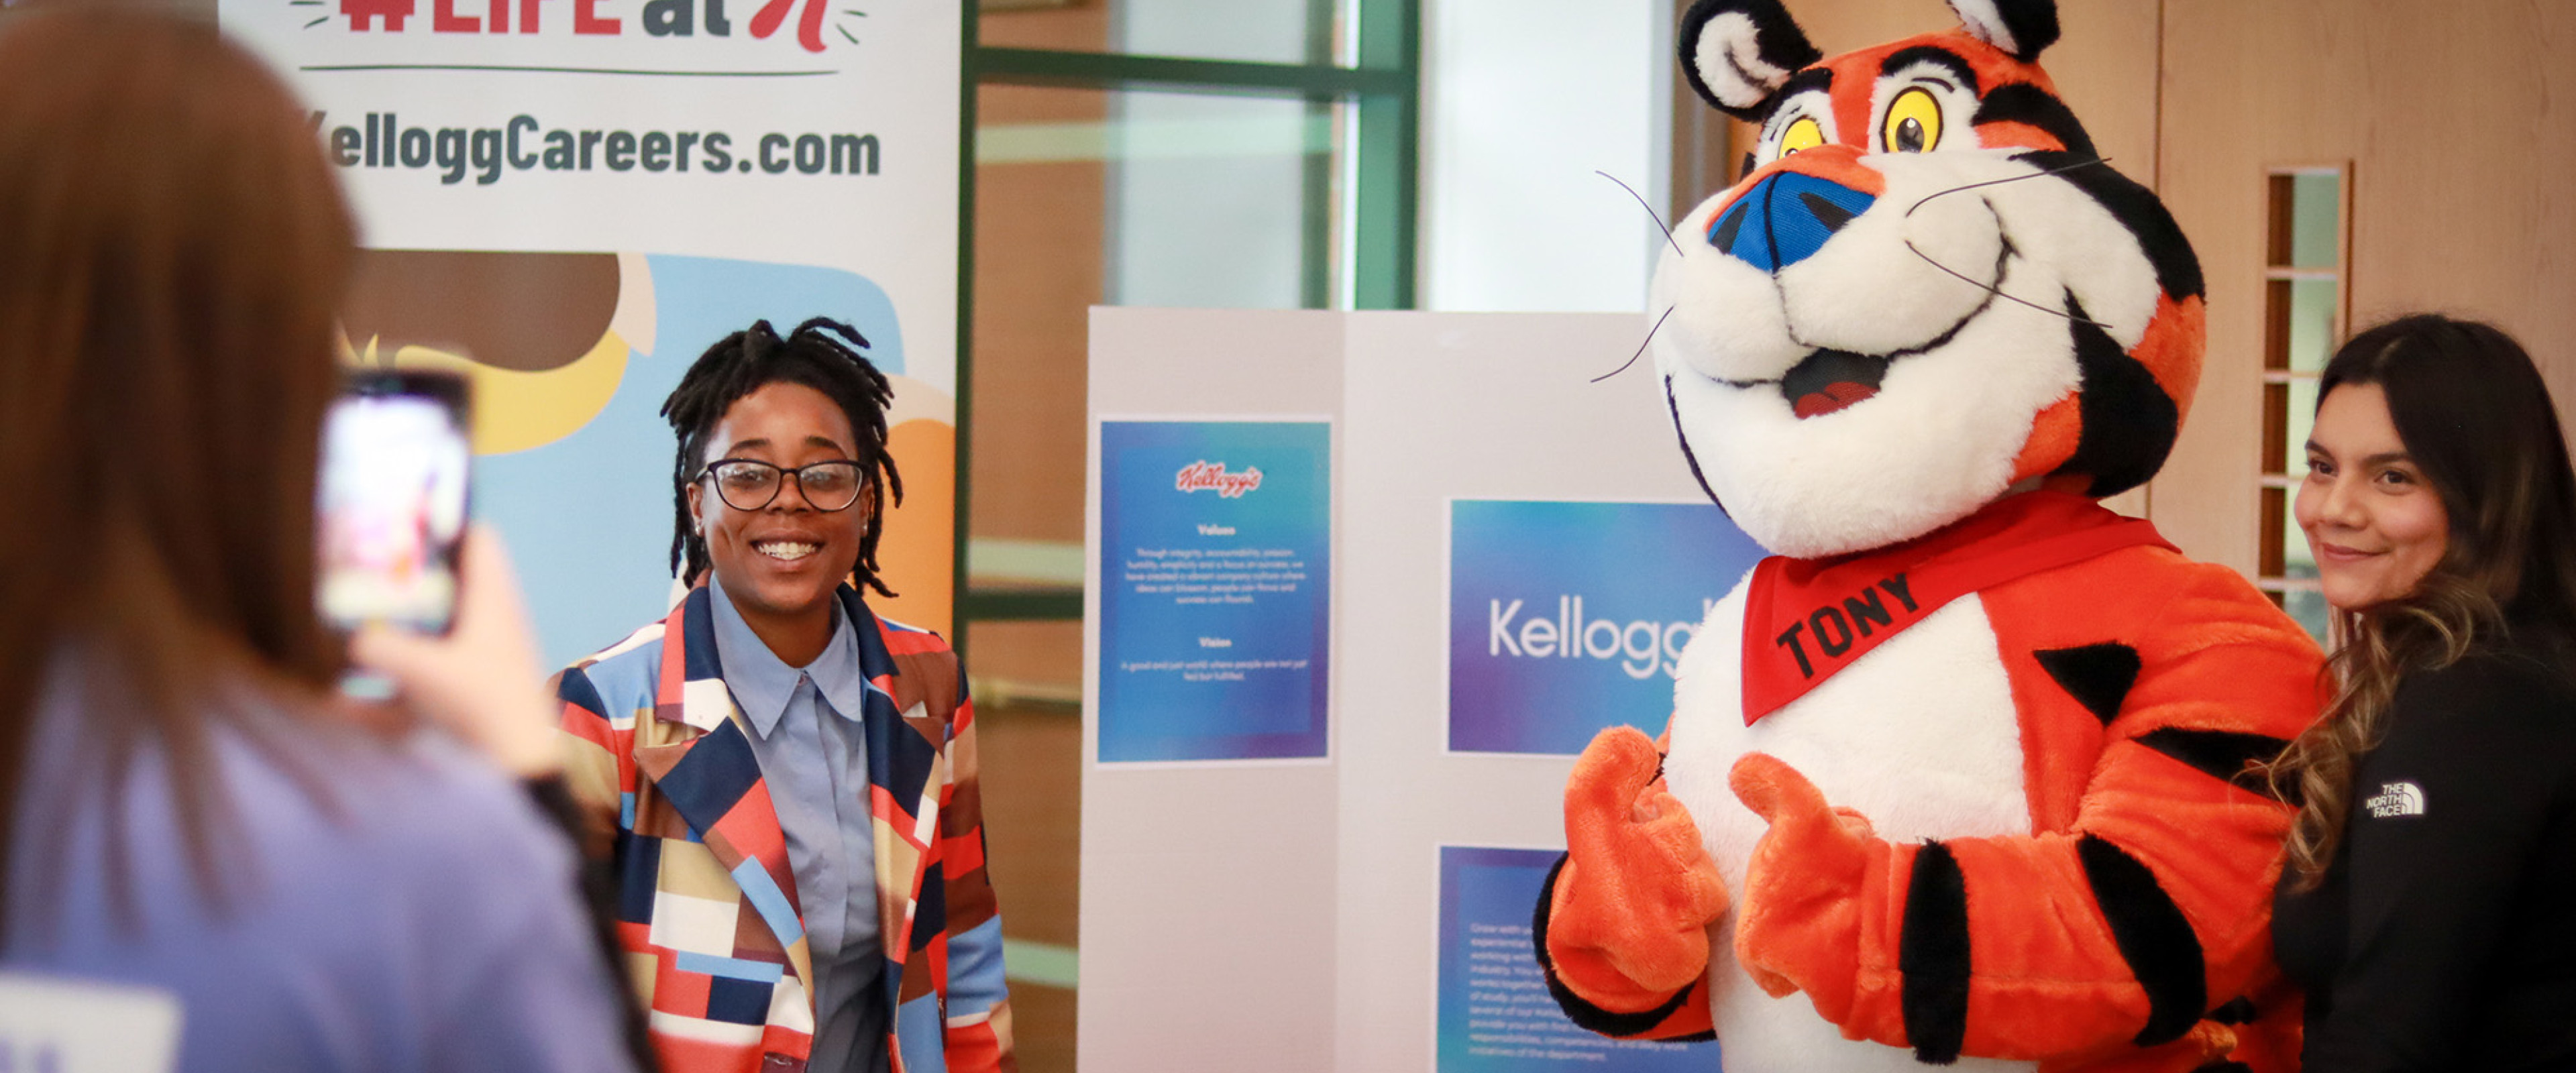 A student is getting a photo with Tony the Tiger at a Business Externship Program event.